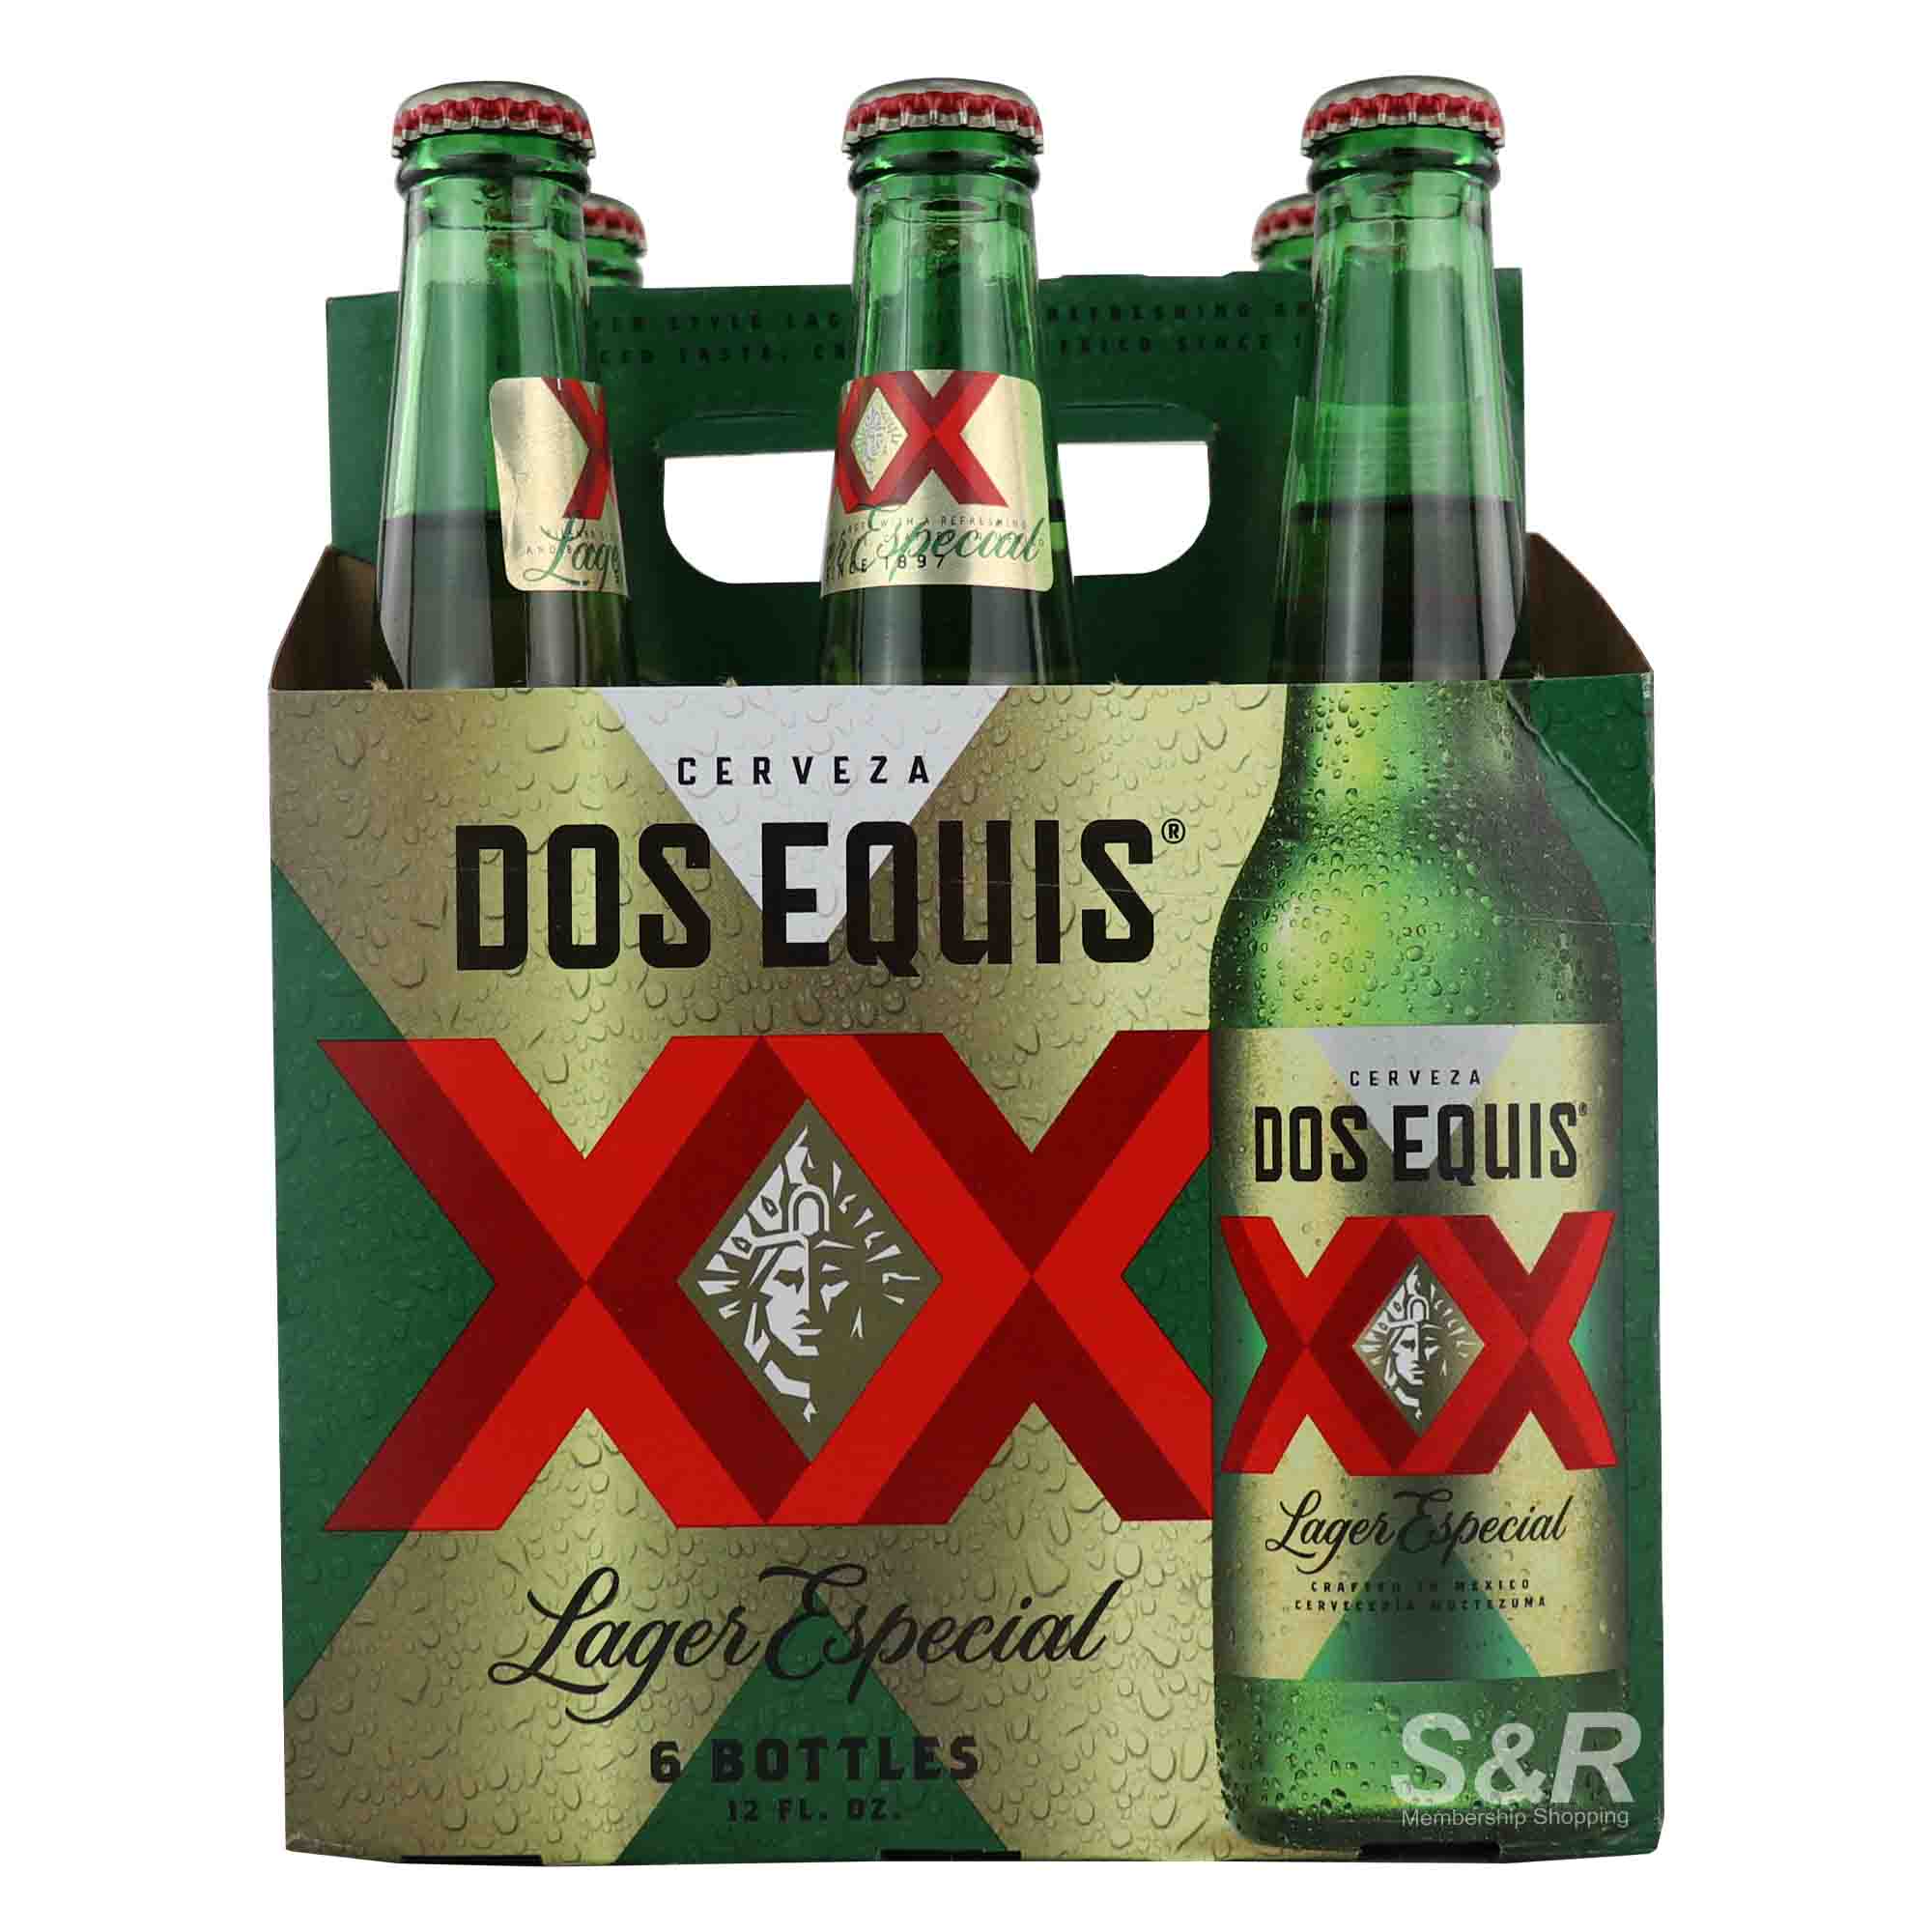 Dos Equis Lager Especial Beer (355mL x 6pcs)